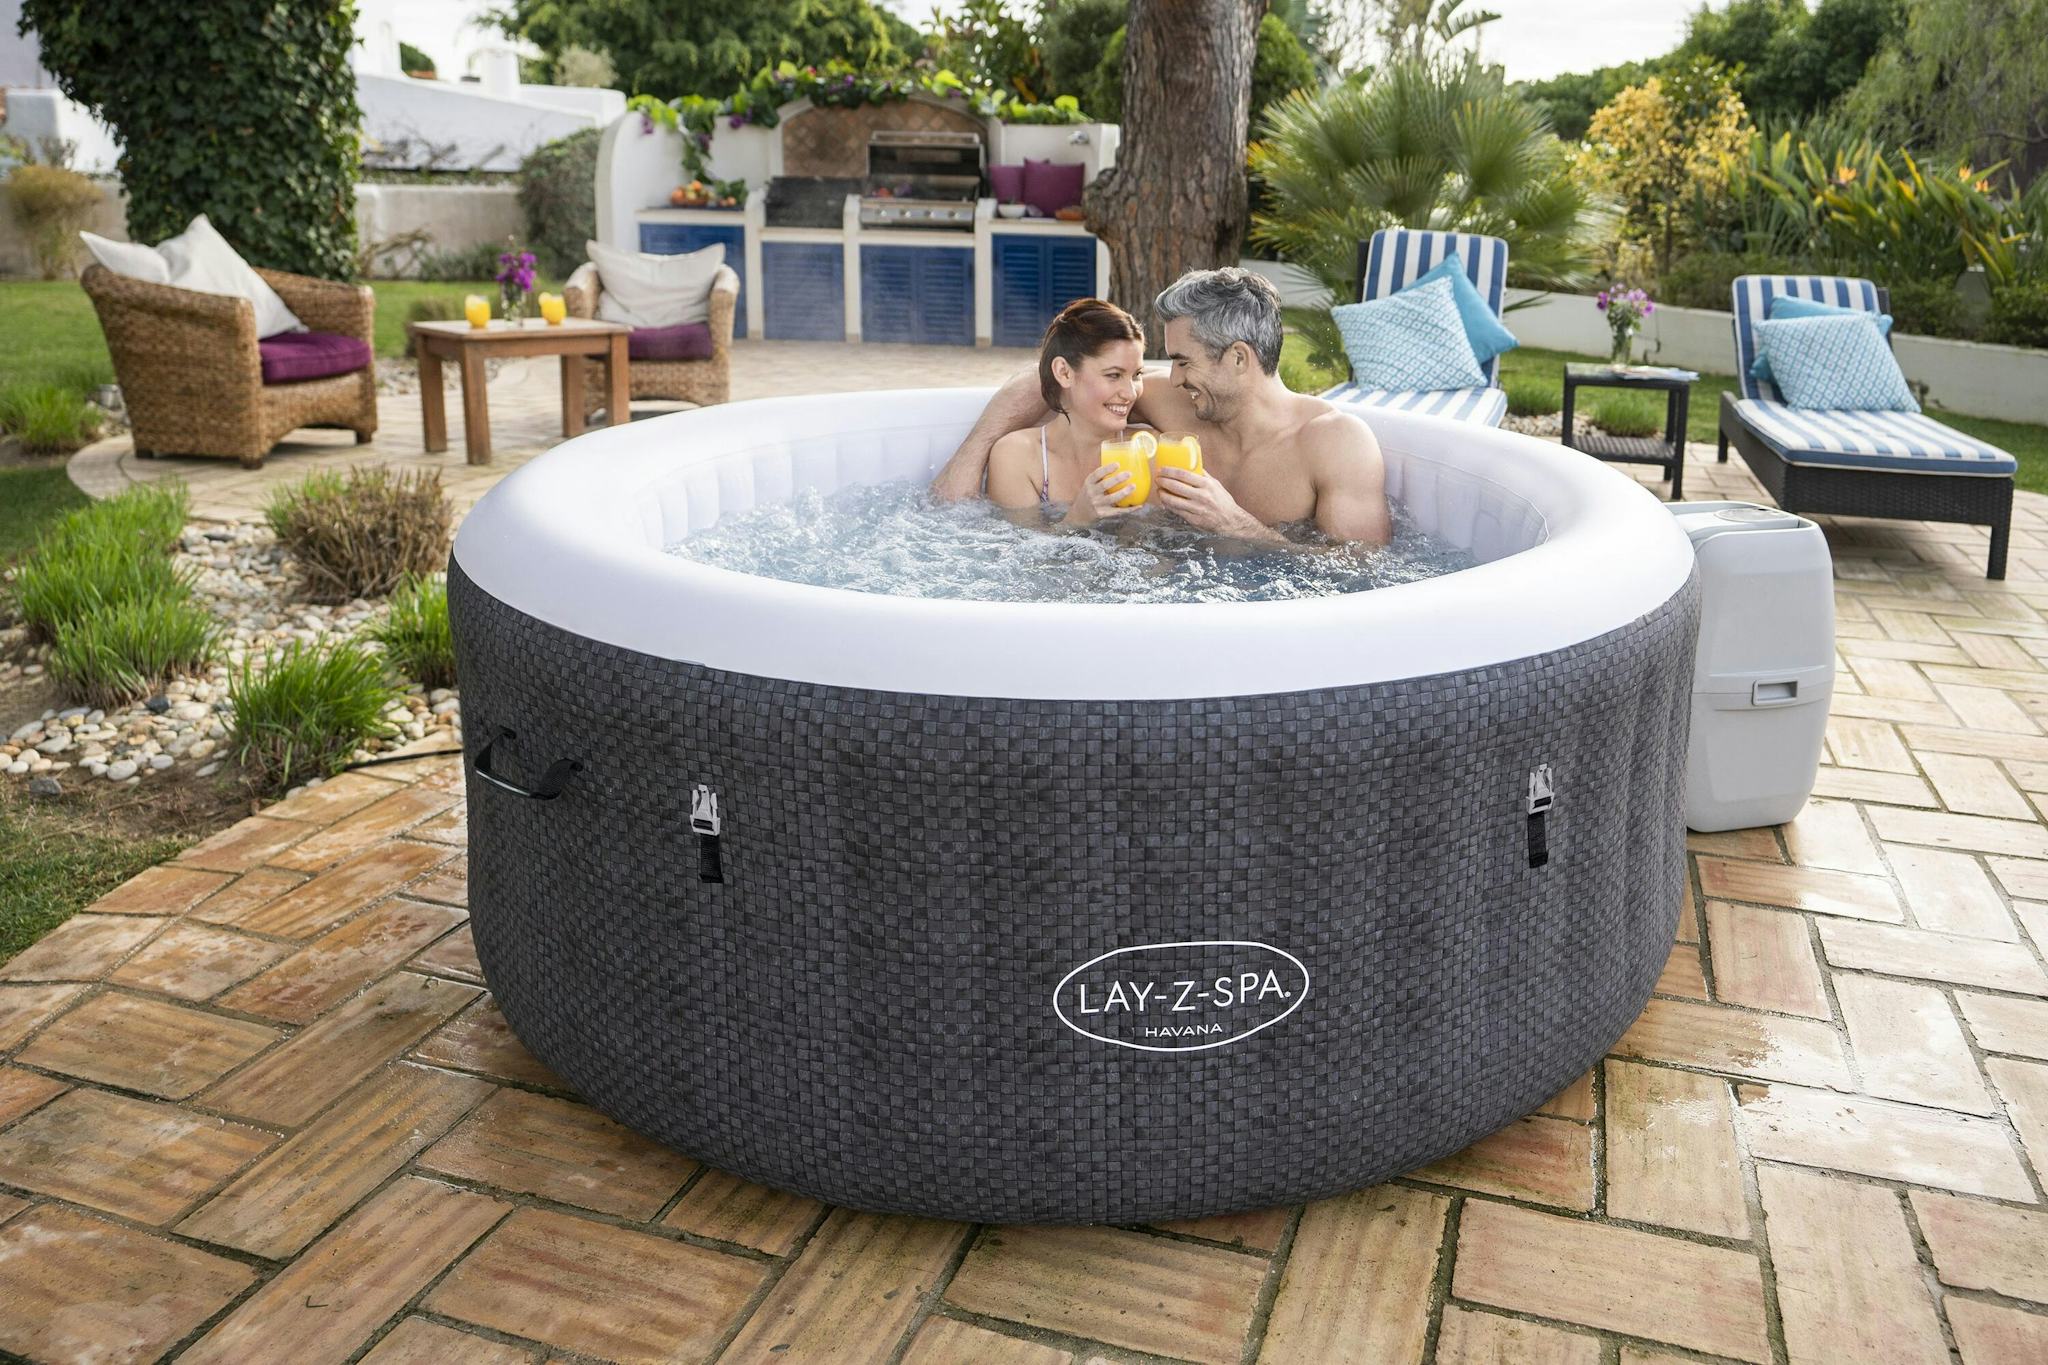 Spas Gonflables Spa gonflable rond Lay-Z-Spa Havana Airjet™ 2 - 4 personnes Bestway 3